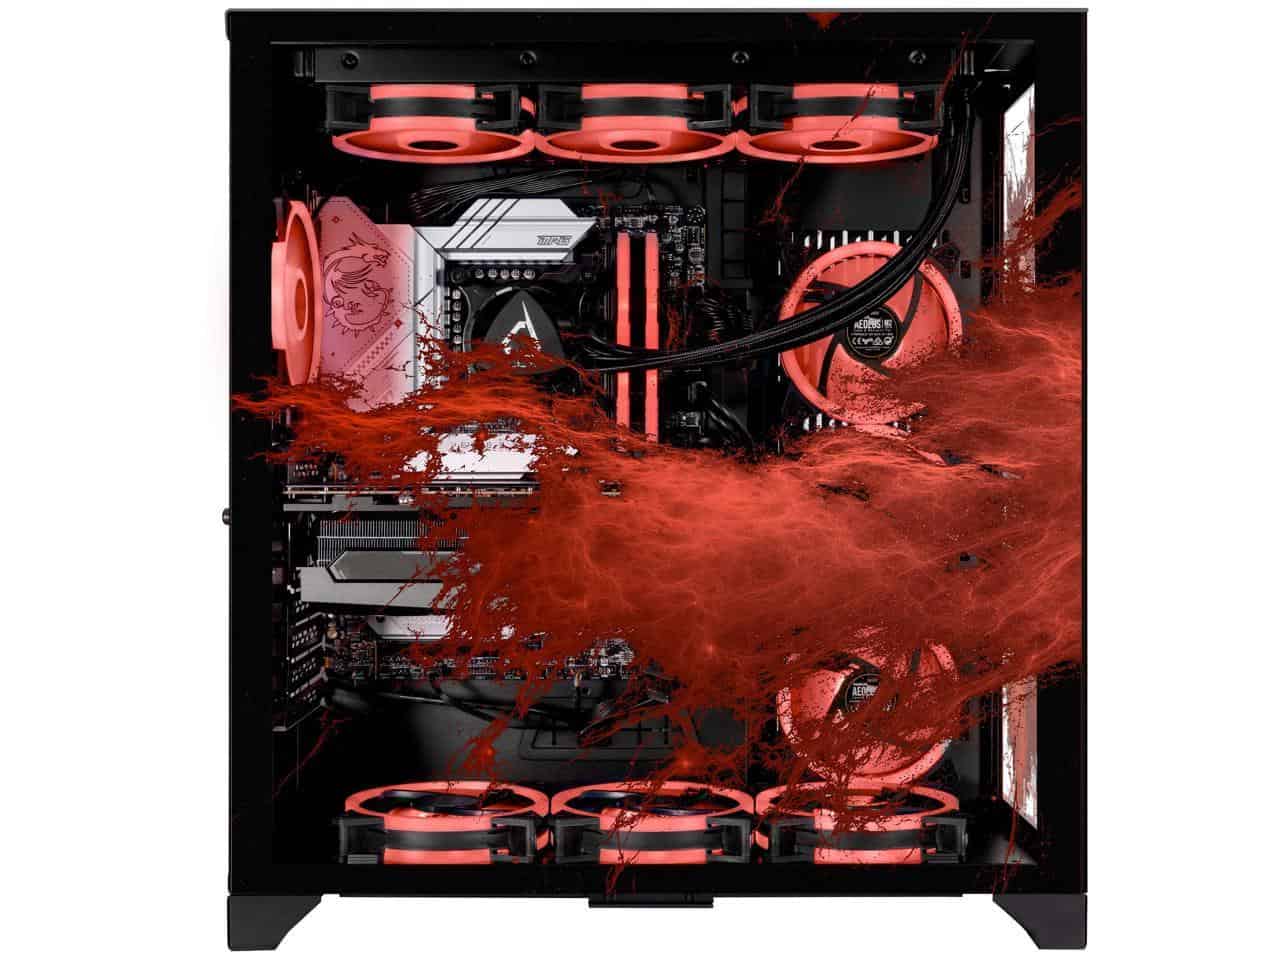 An image of a prebuilt gaming PC with red and black flames.